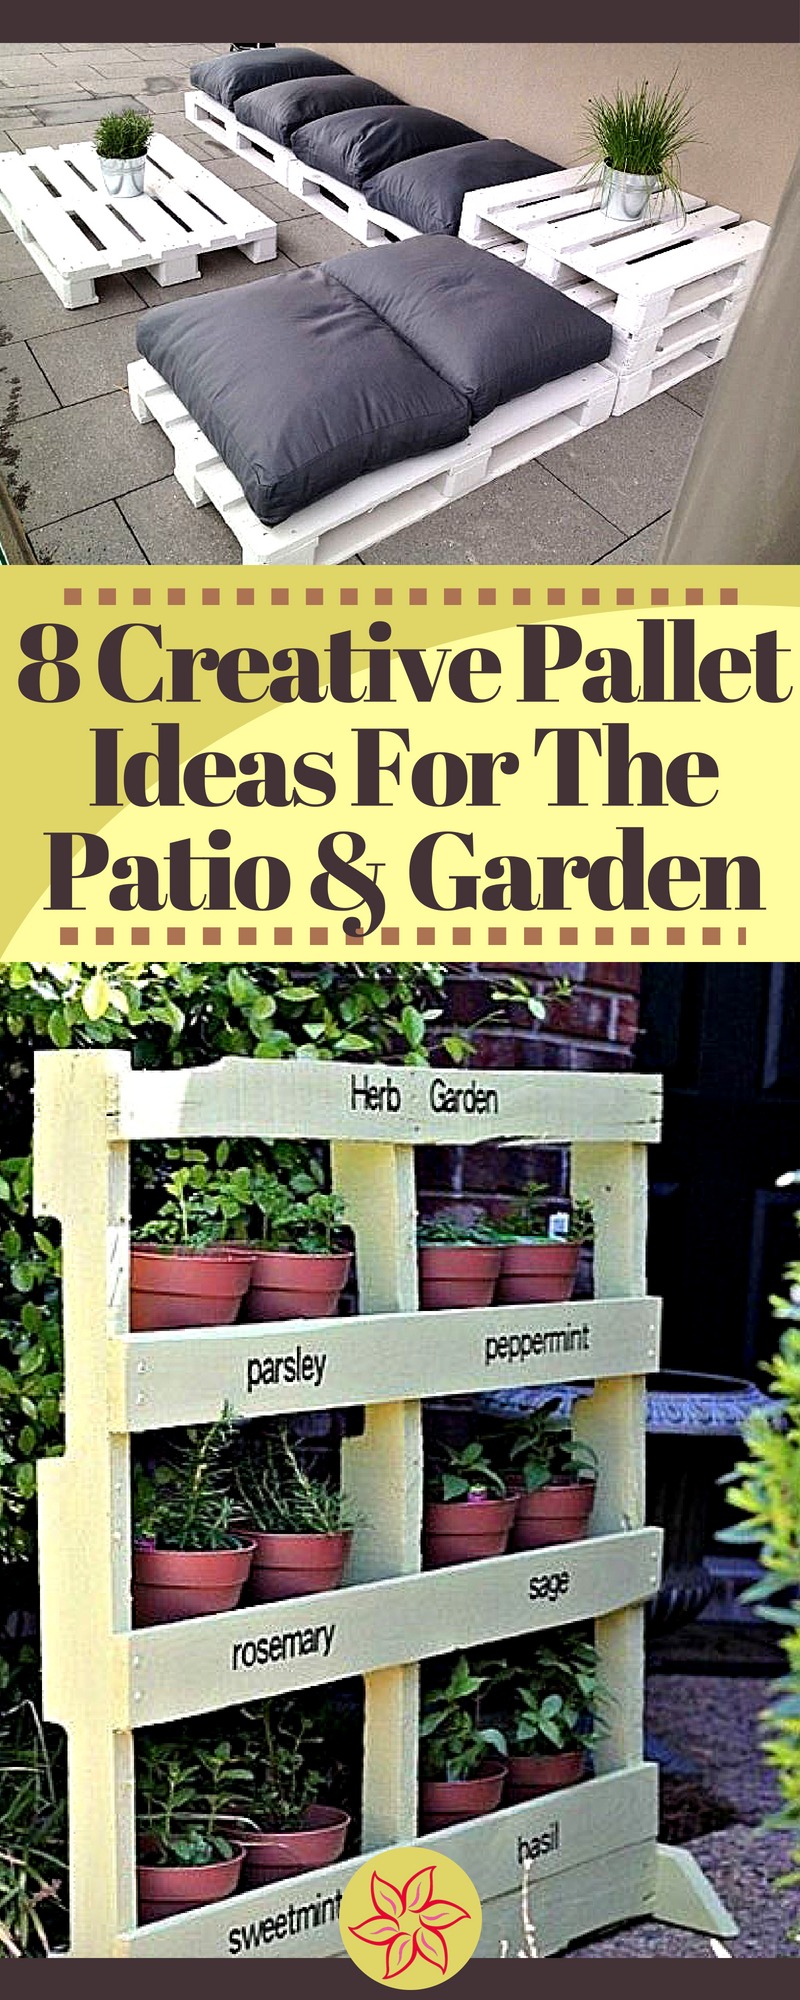 8 Creative used pallet ideas for the patio and garden